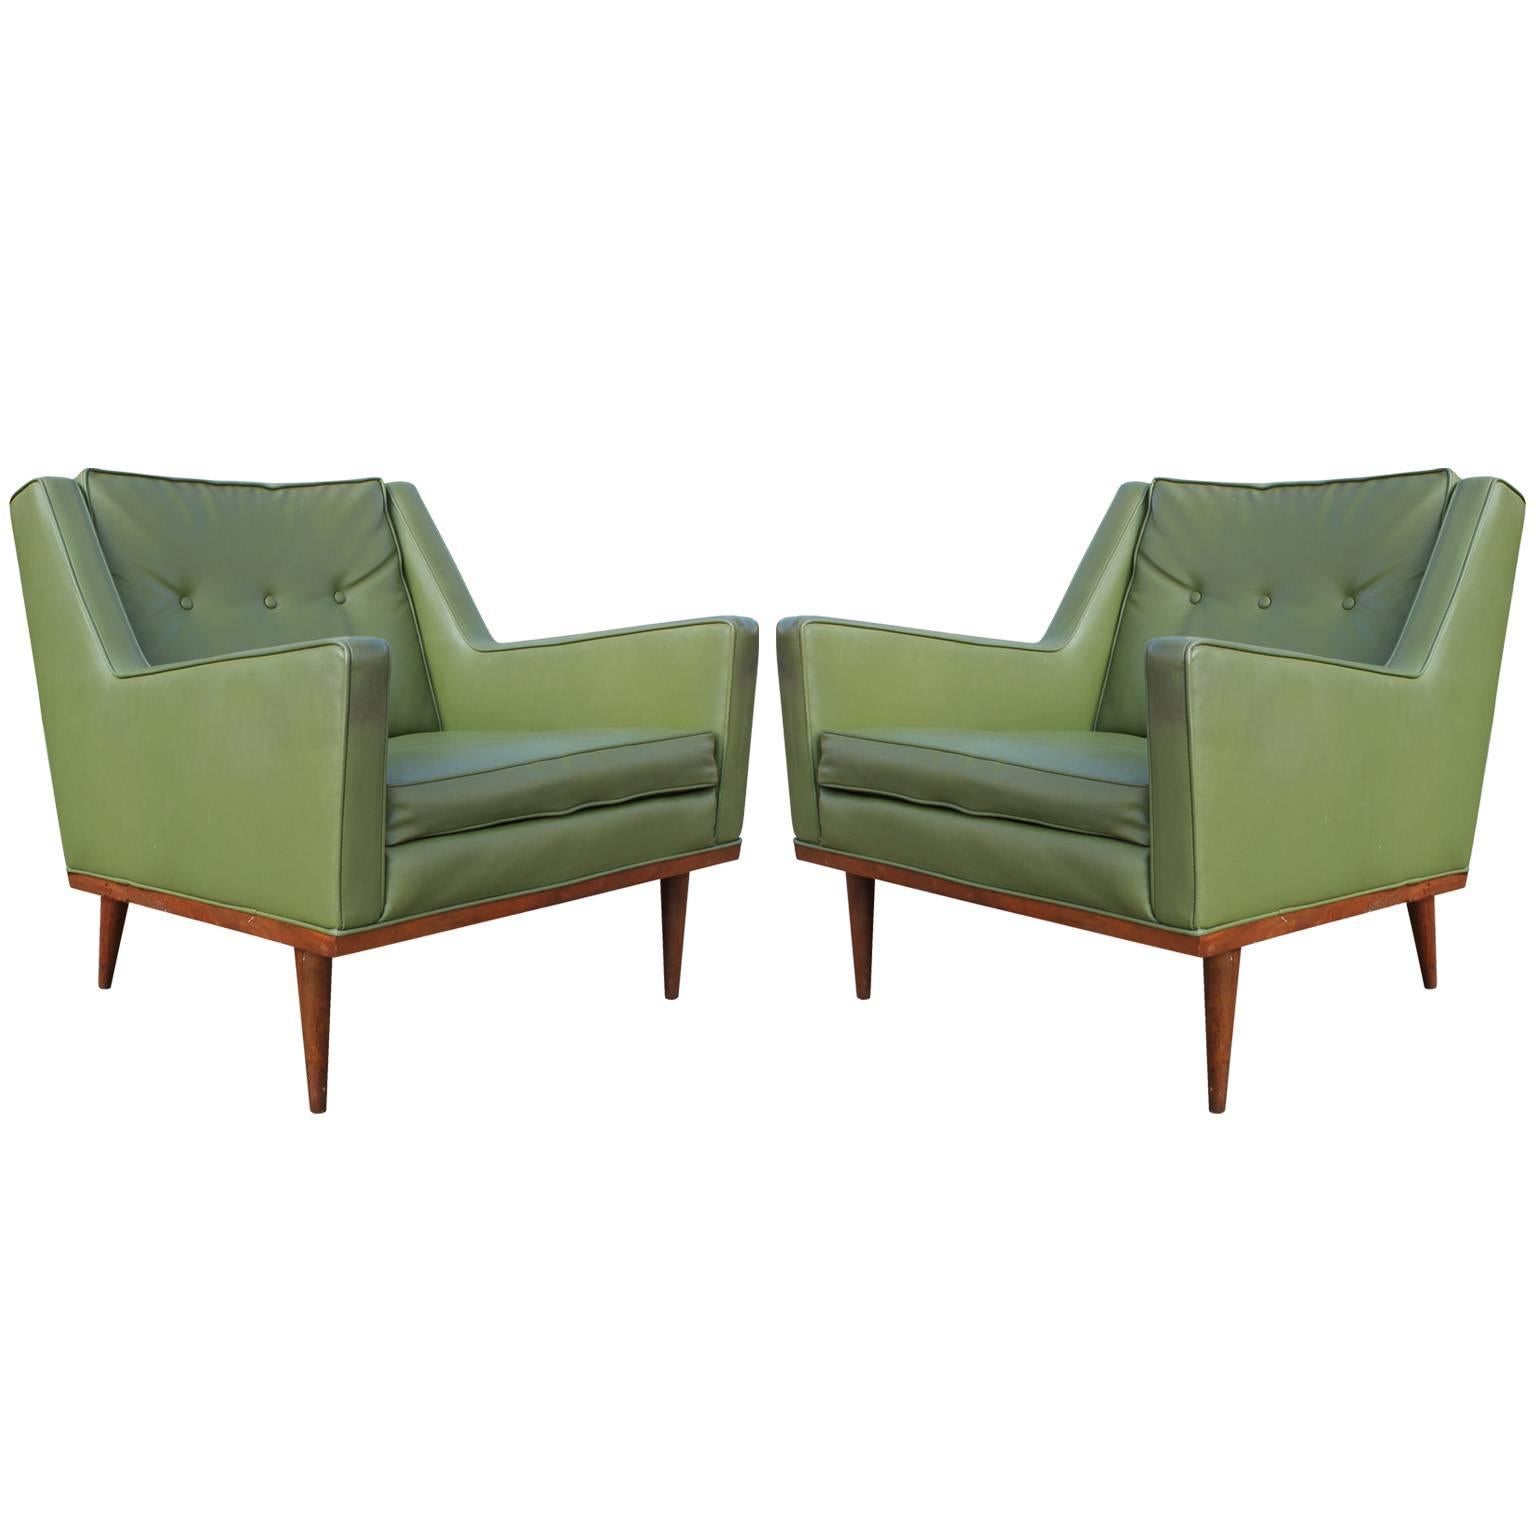 Pair of Milo Baughman for Thayer Coggin James Inc Lounge Chairs